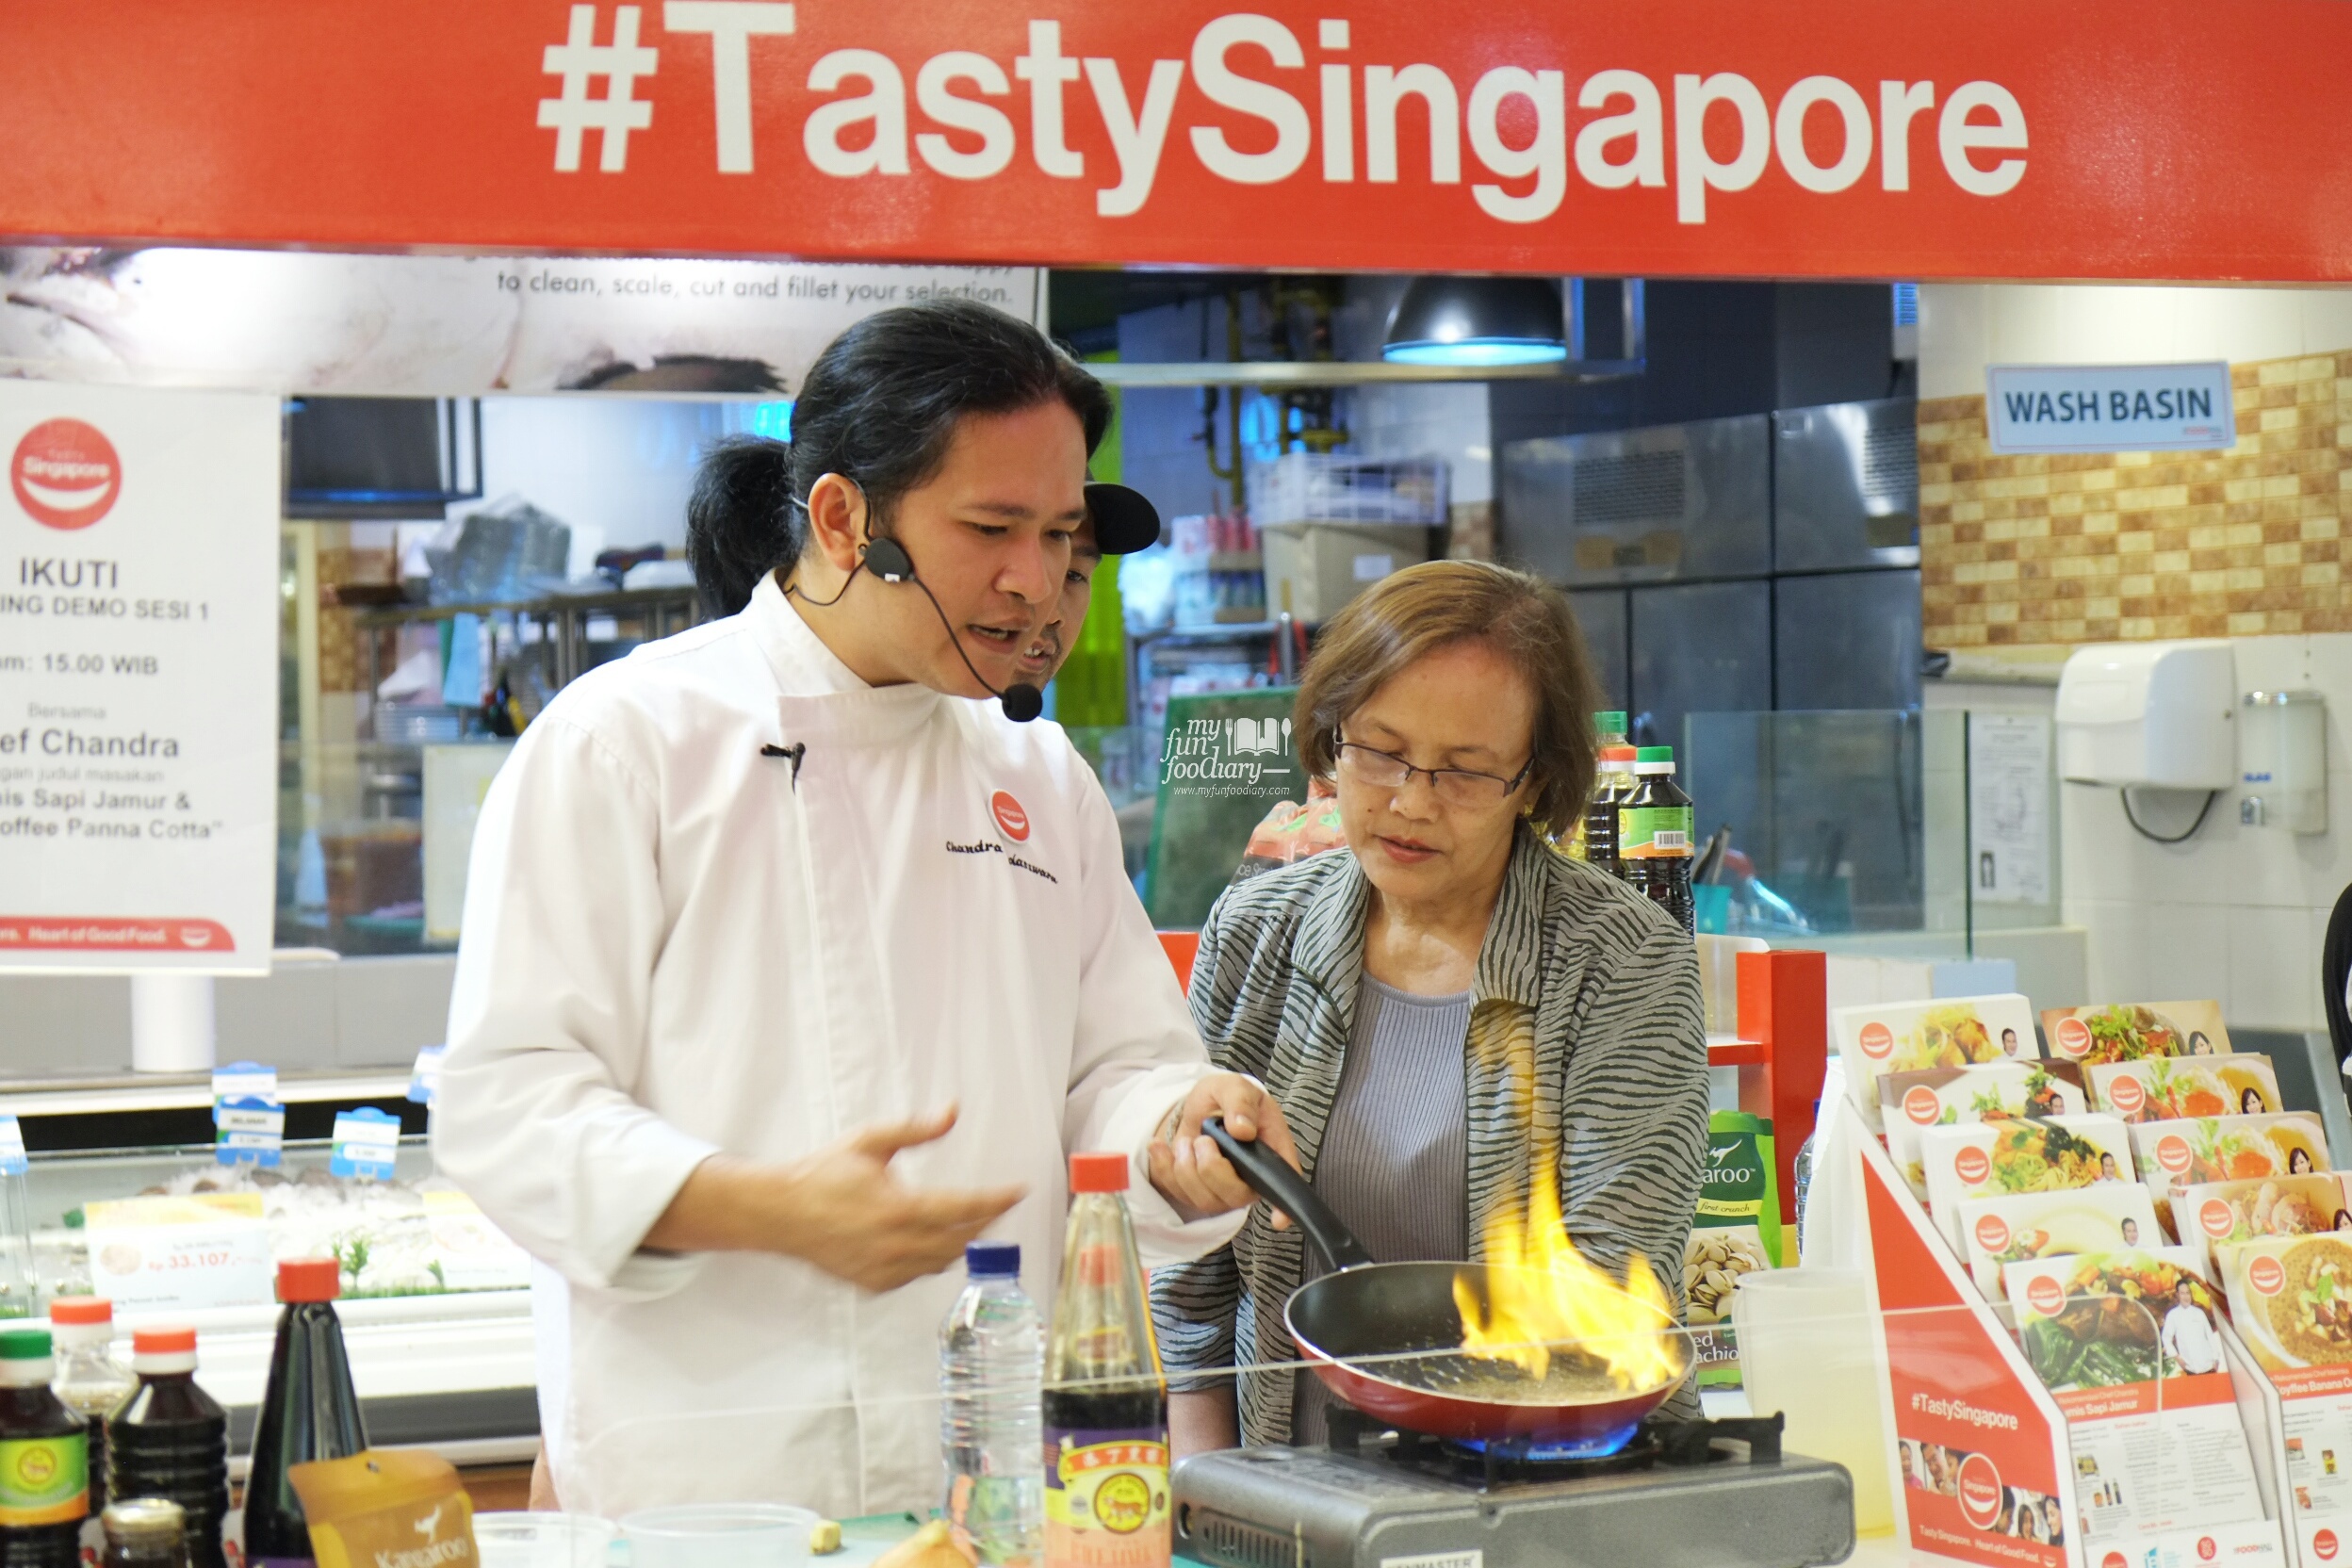 Tasty Singapore Cooking Demo with Chef Chandra by Myfunfoodiary